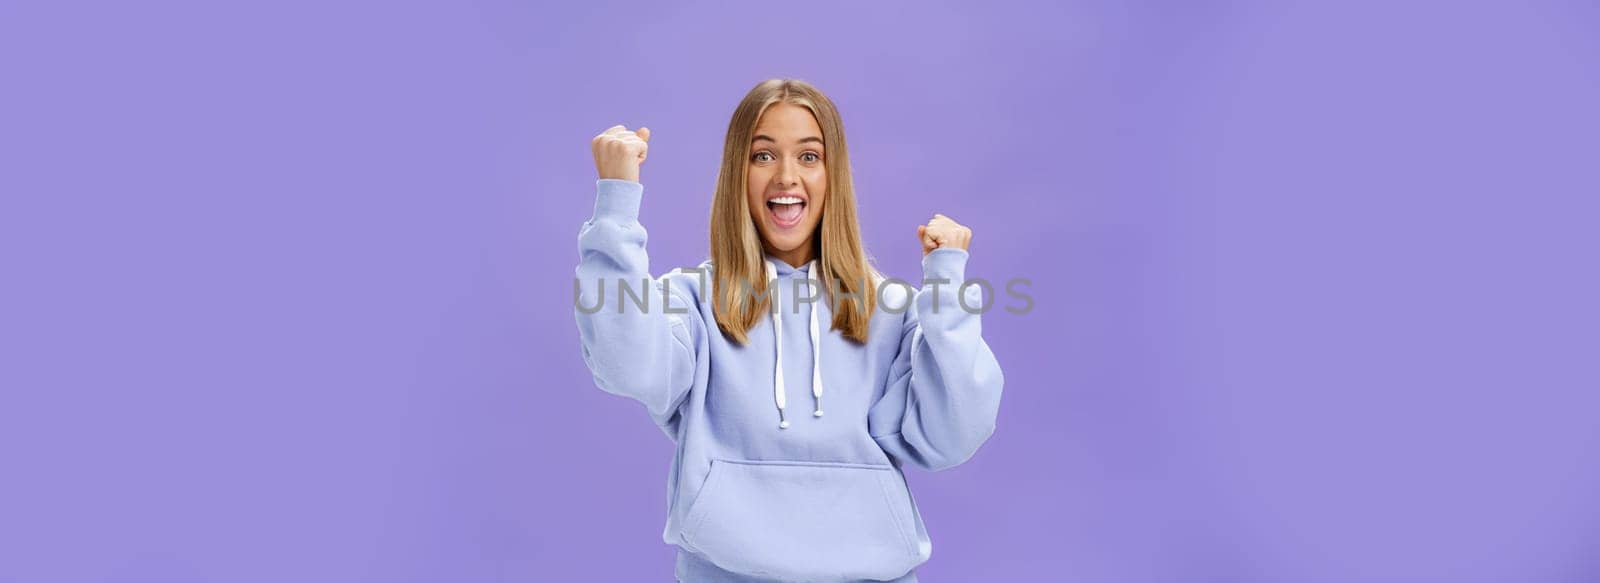 Cheerful happy and supportive young girlfriend with fair hair and tan in warm hoodide raising fists in cheer and triumph smiling saying yeah celebrating goal or success over purple background by Benzoix